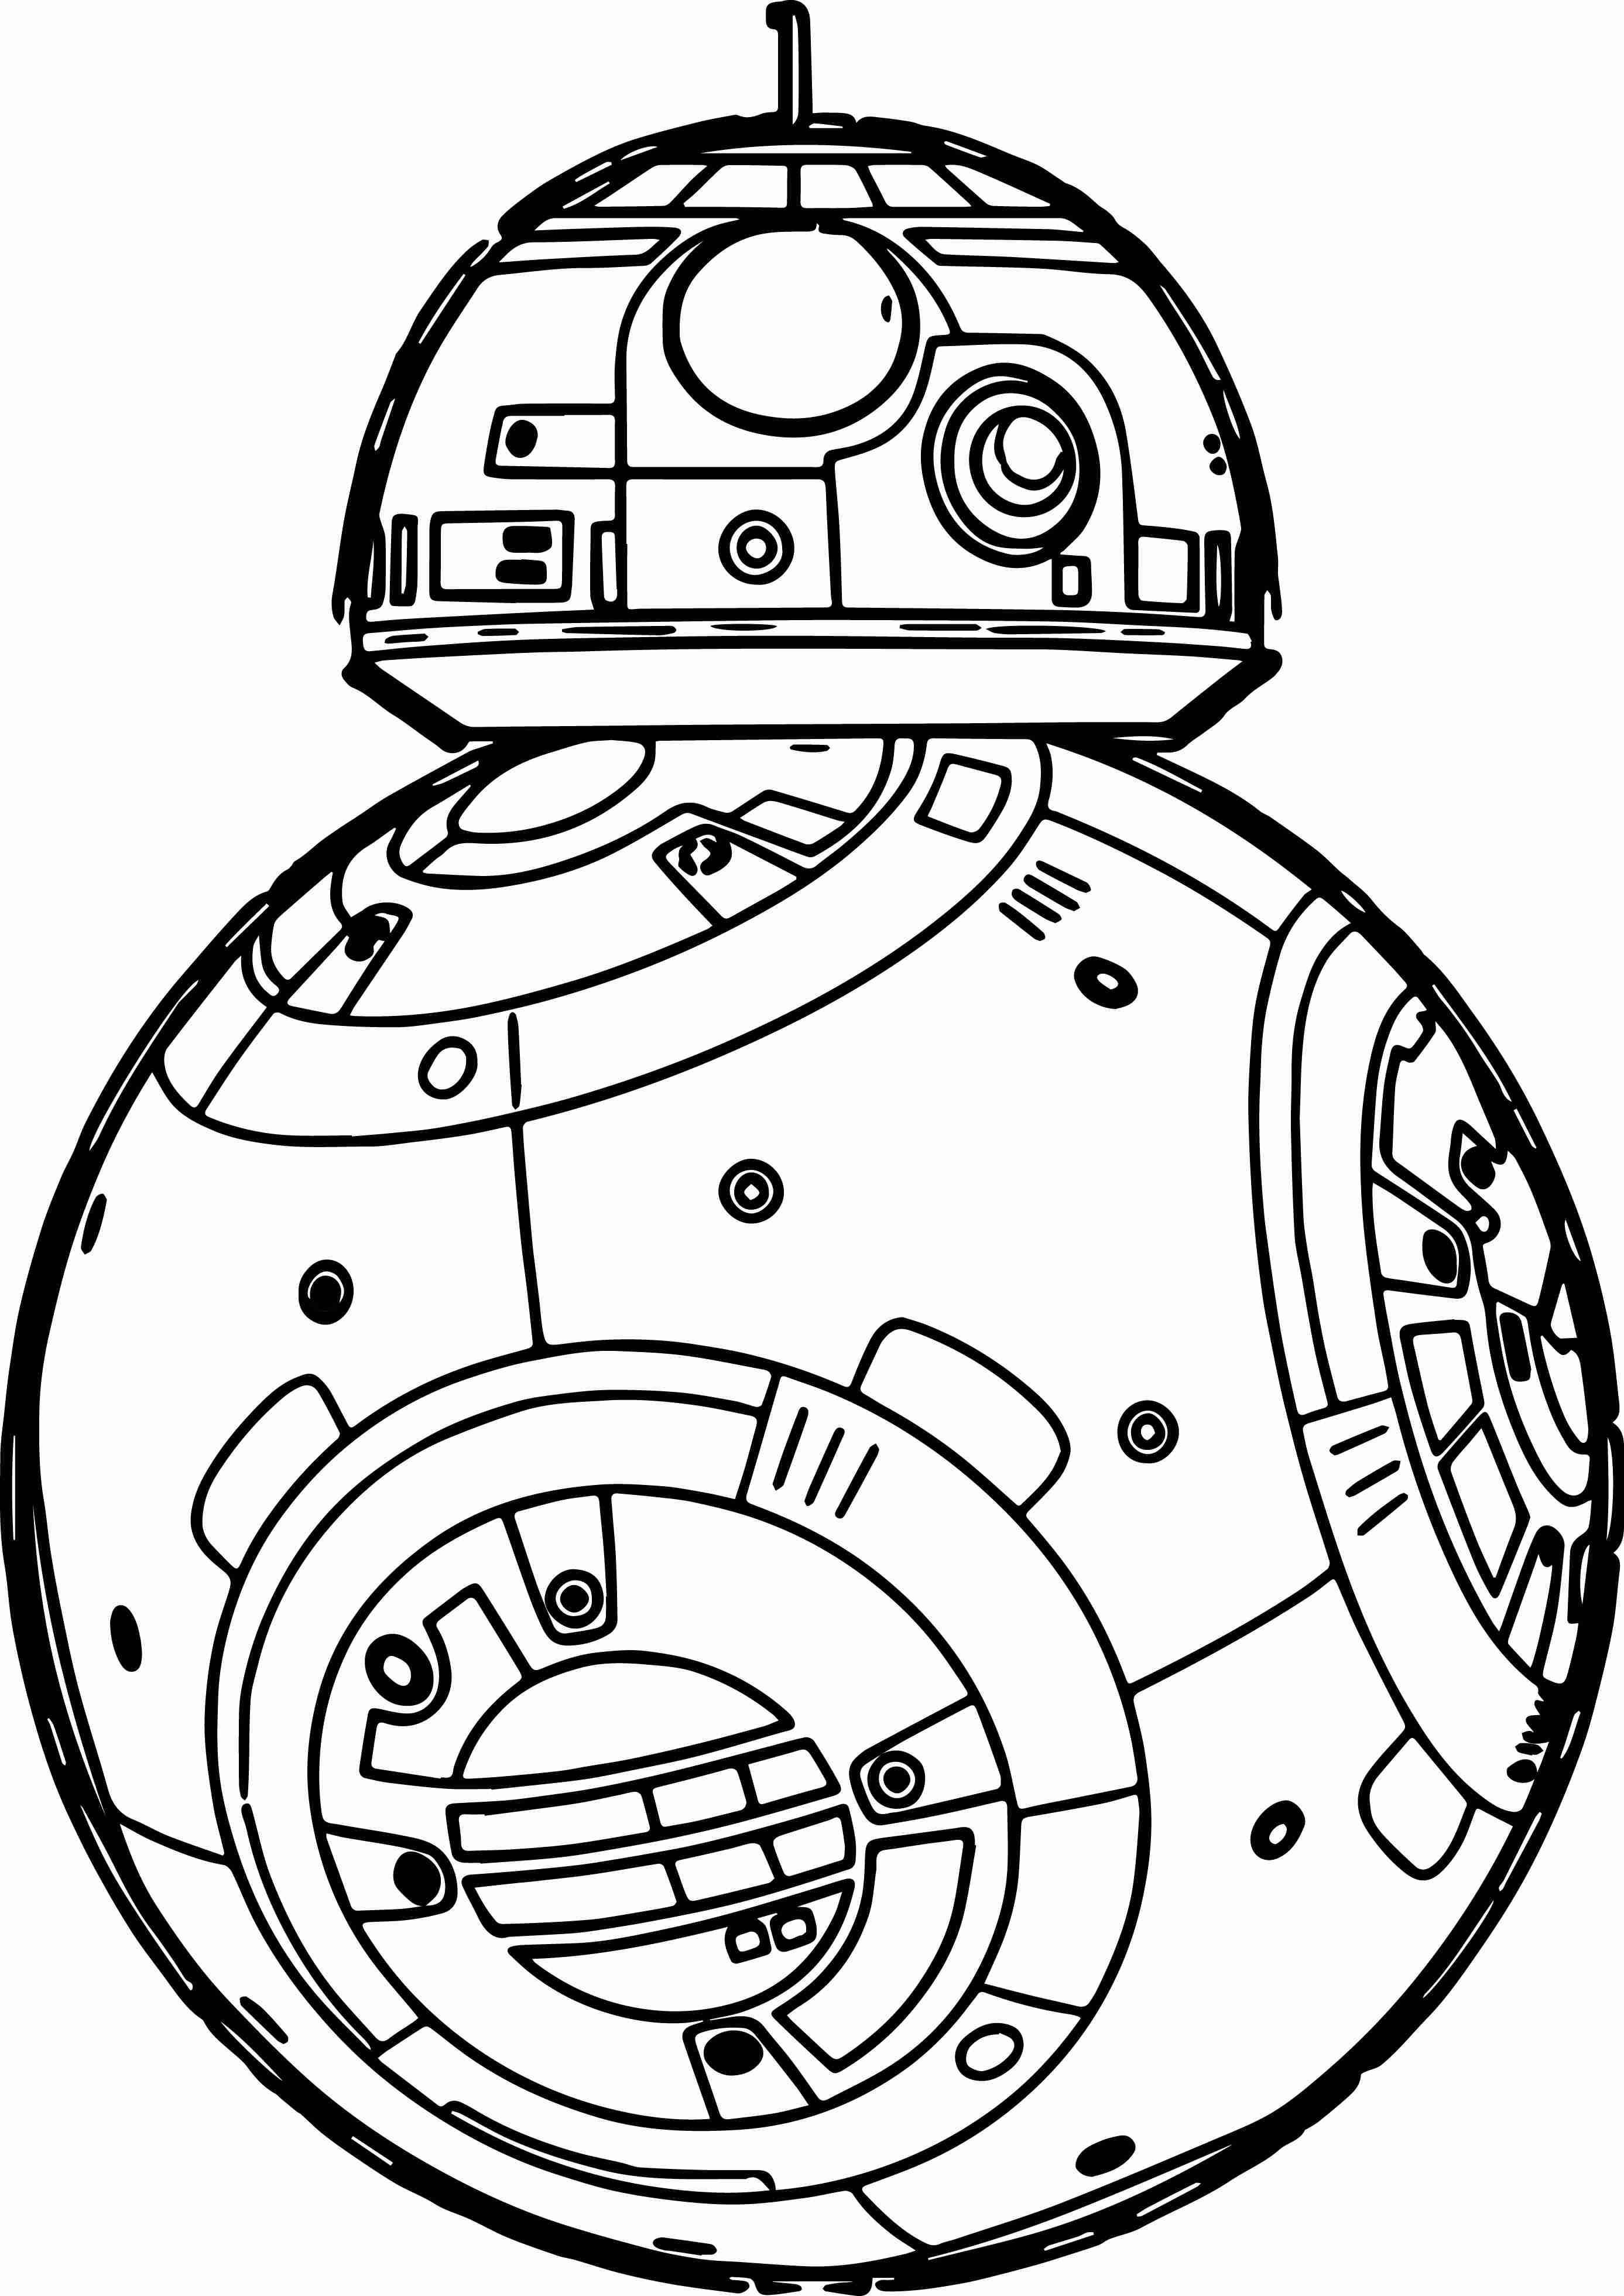 adult-coloring-pages-star-wars-at-getdrawings-free-download